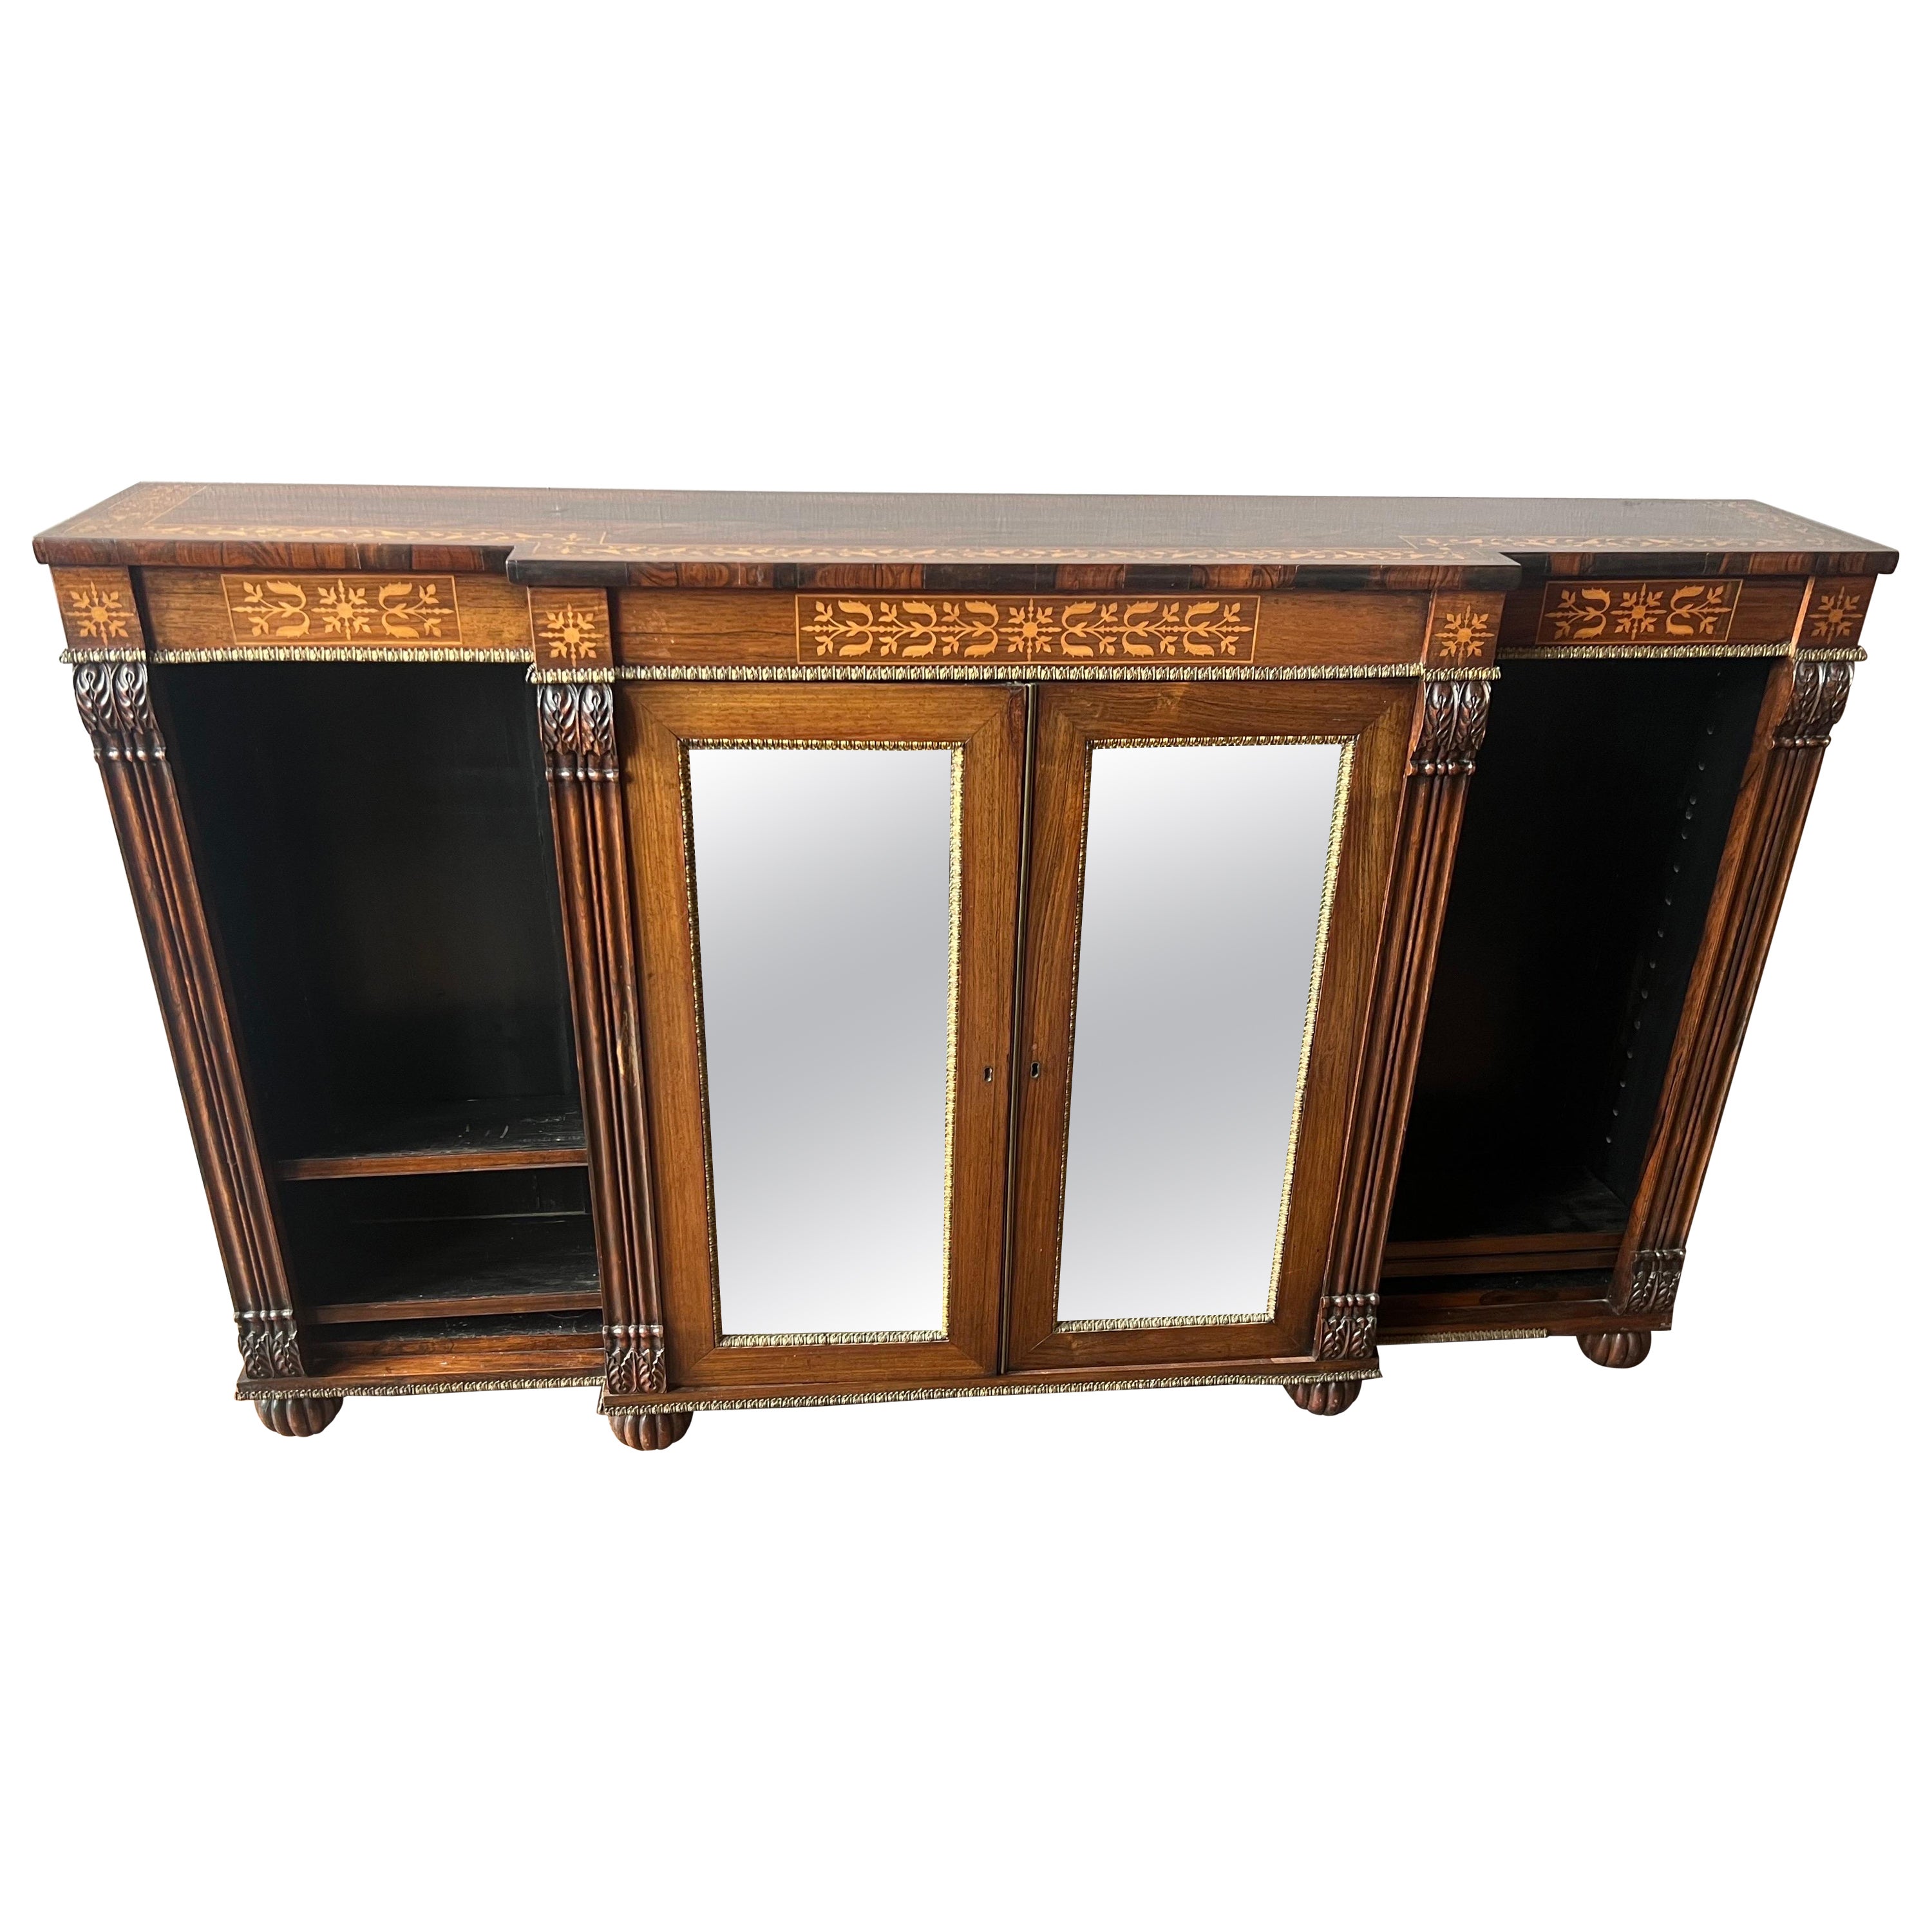 19th Century English Regency Inlaid Rosewood Breakfront Bookcase Cabinet  For Sale